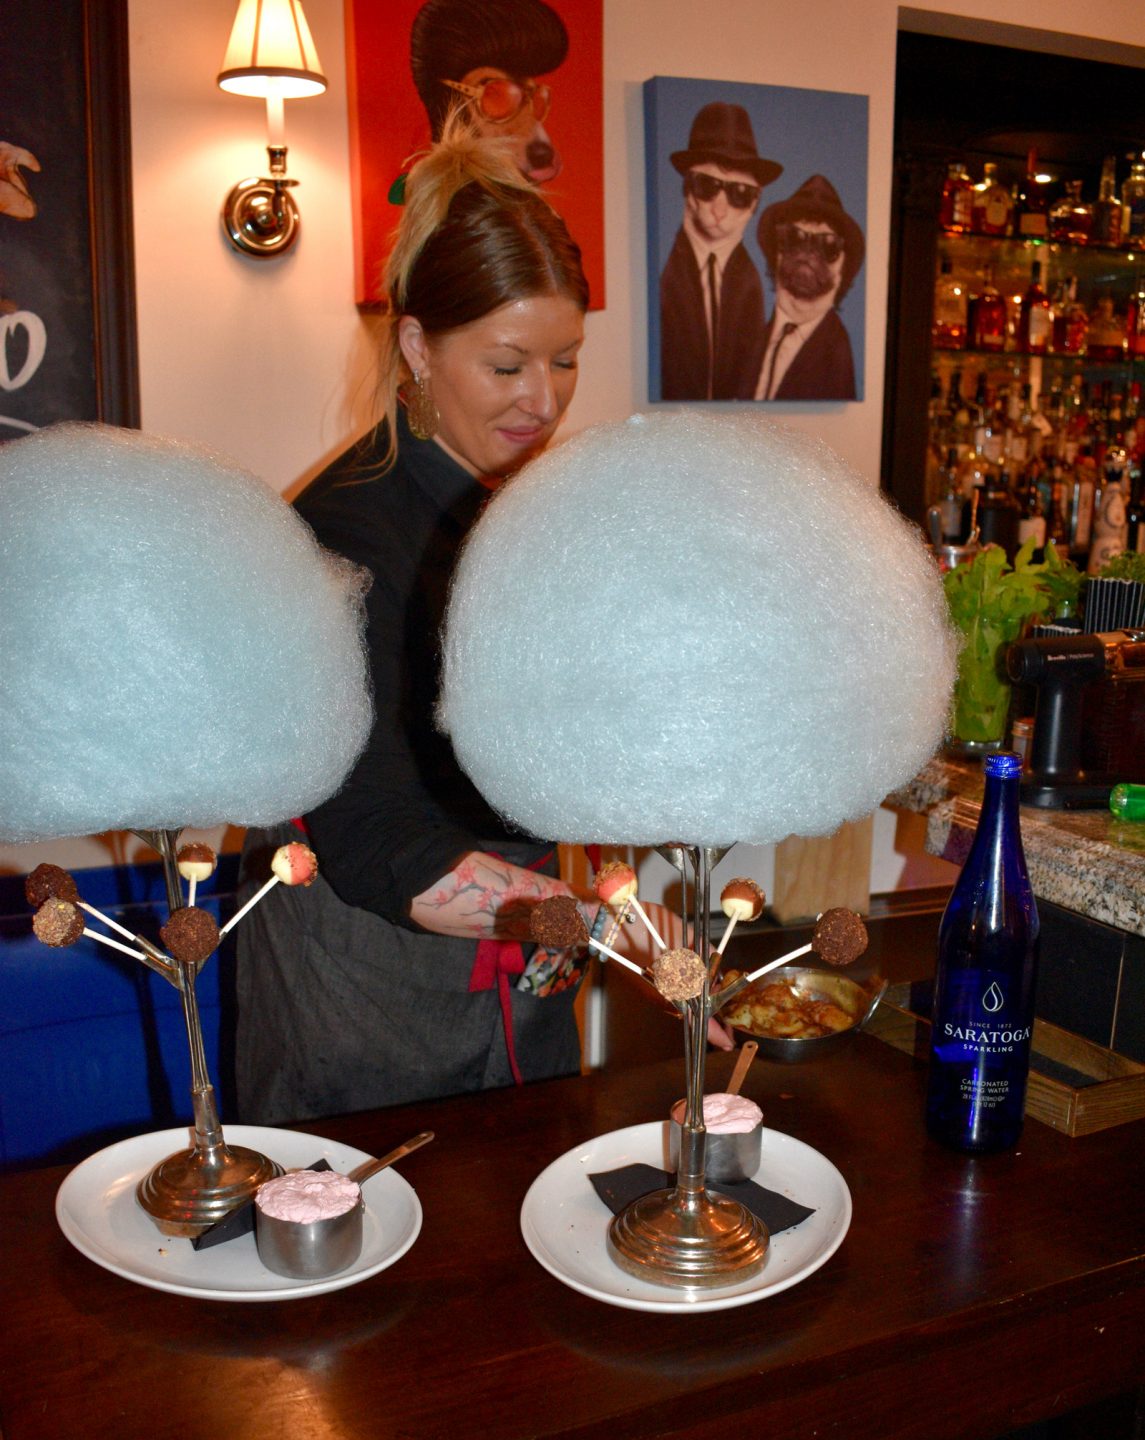 Cotton candy being served for dessert